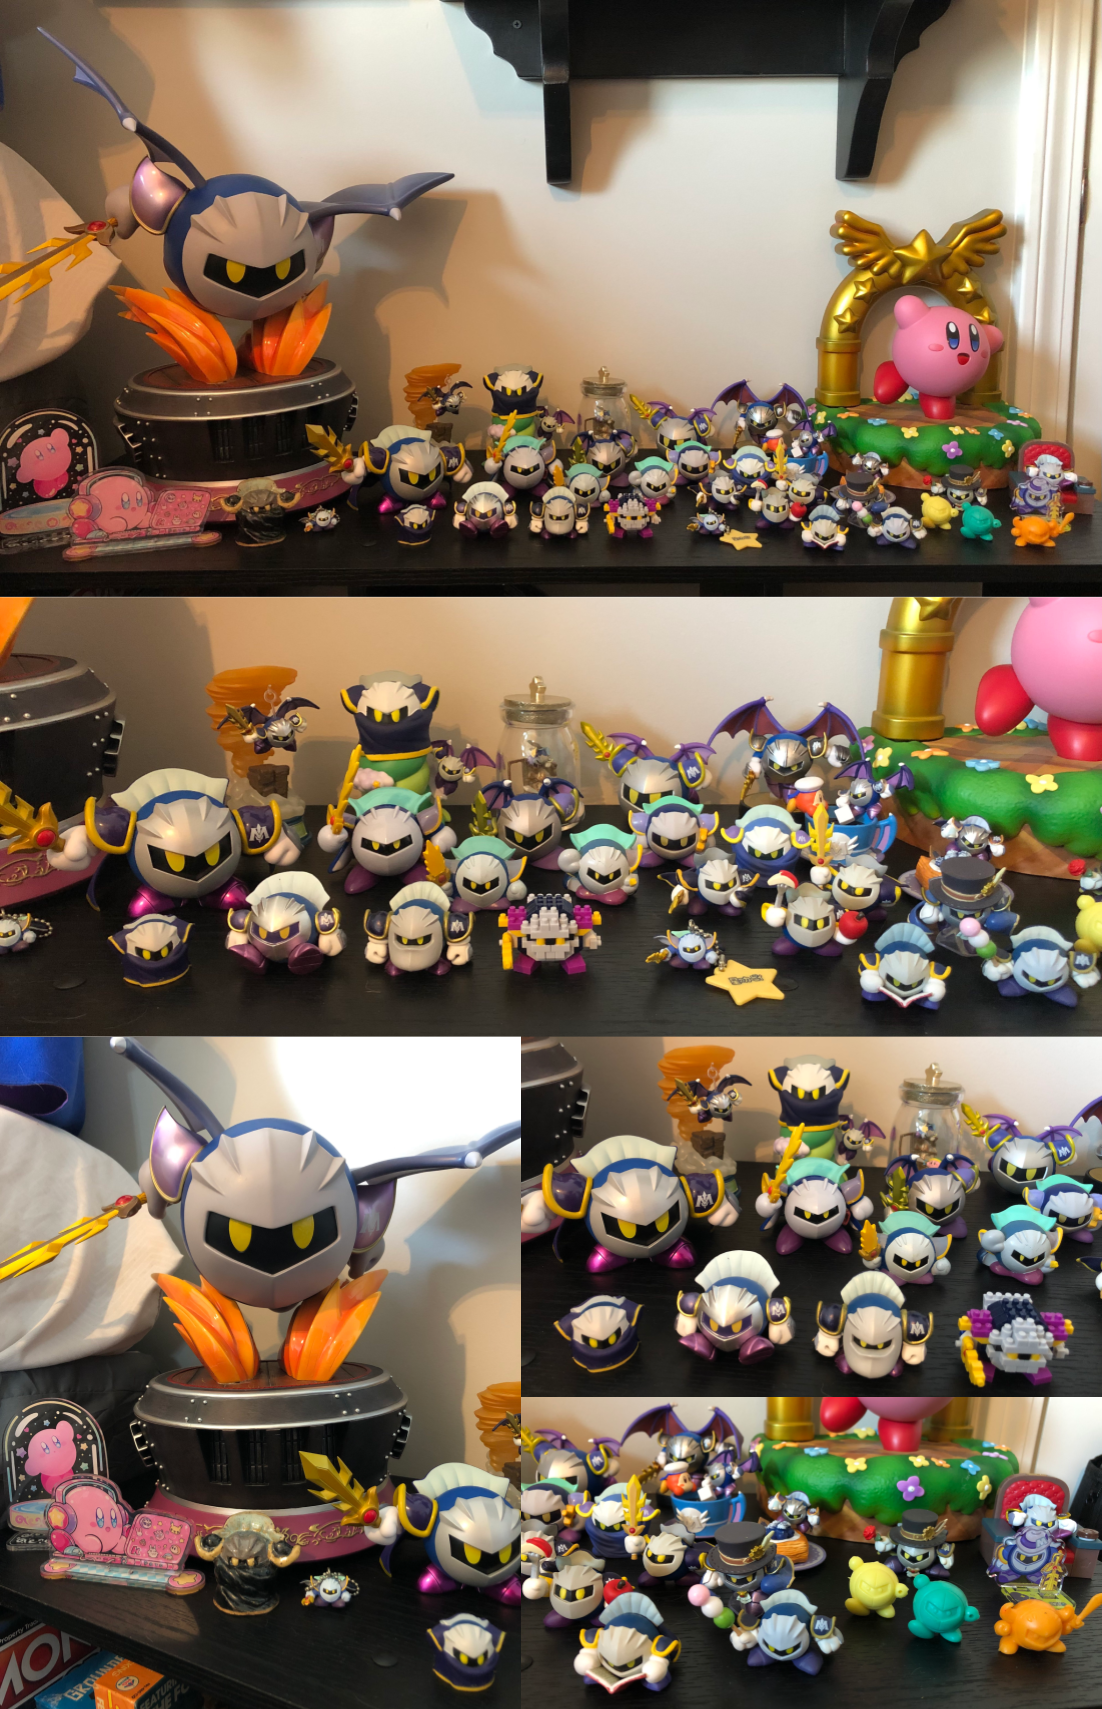 multiple photos of around 30 meta knight figures of various sizes on a black shelf. to the left is a large statue of meta knight flying